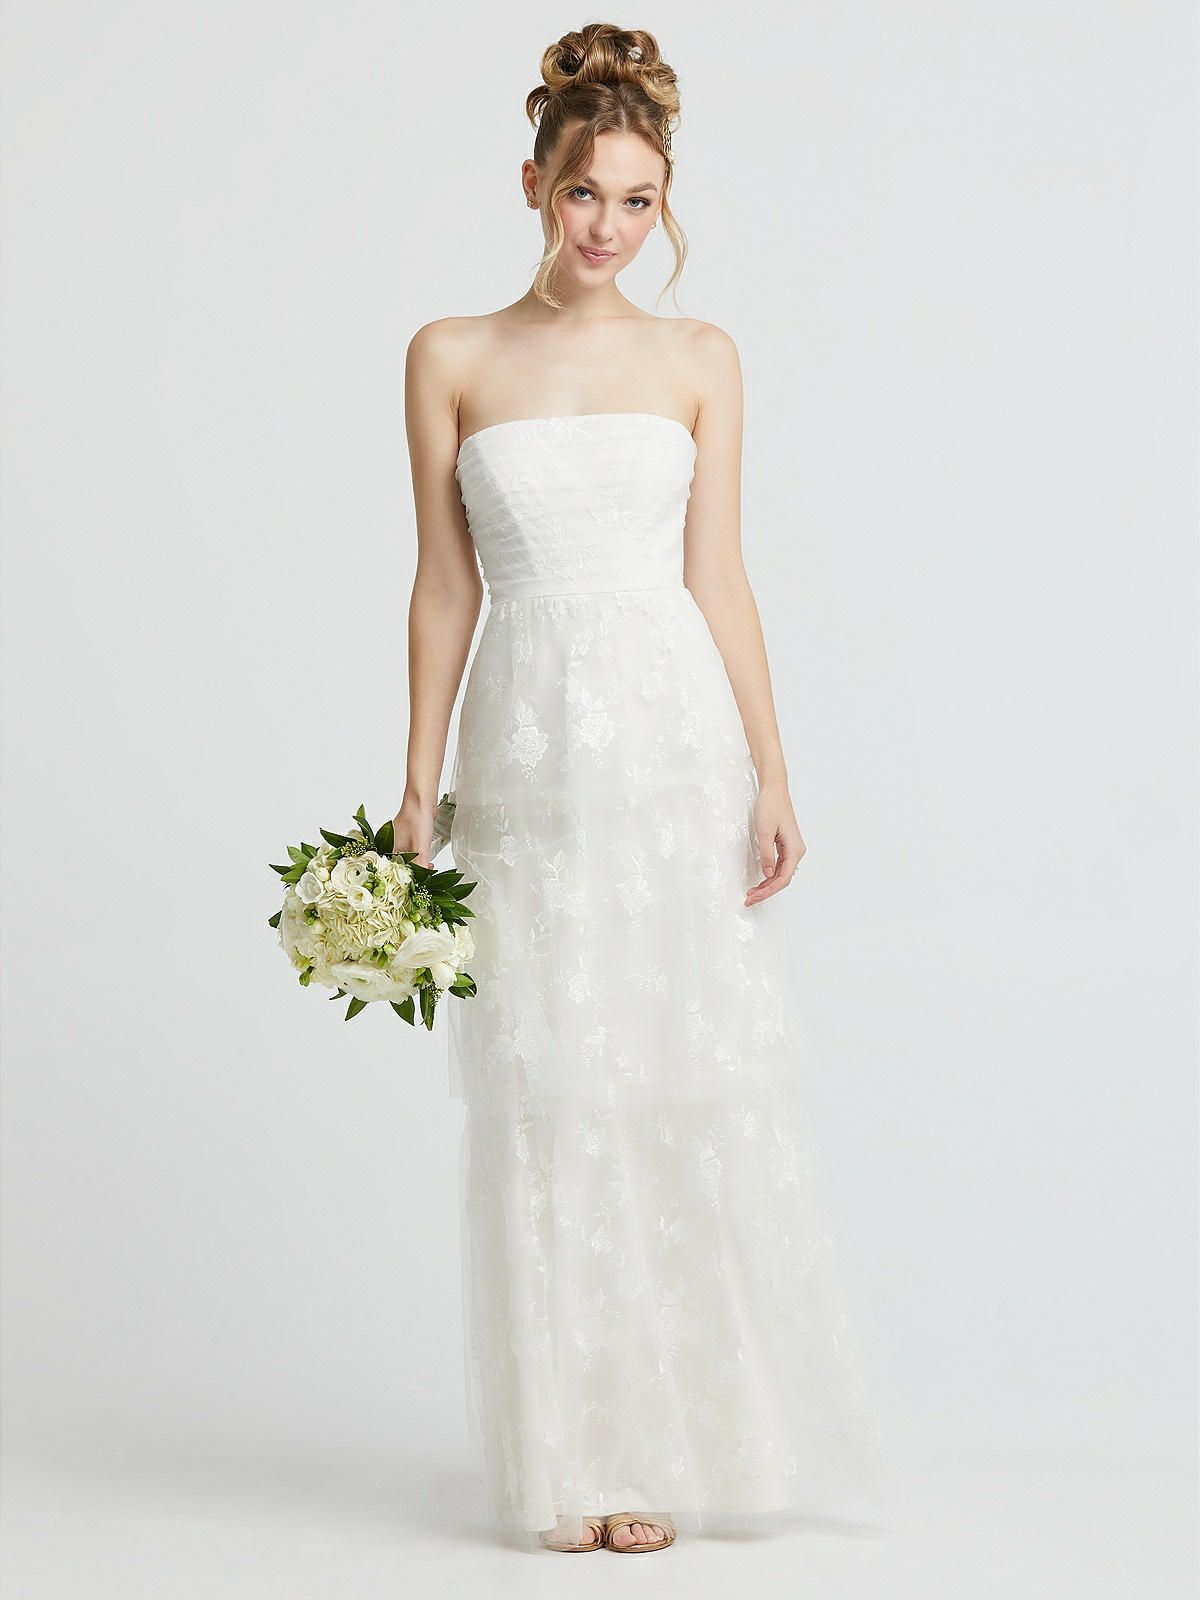 Strapless Ruched Bodice Tiered Lace Wedding Dress | The Dessy Group